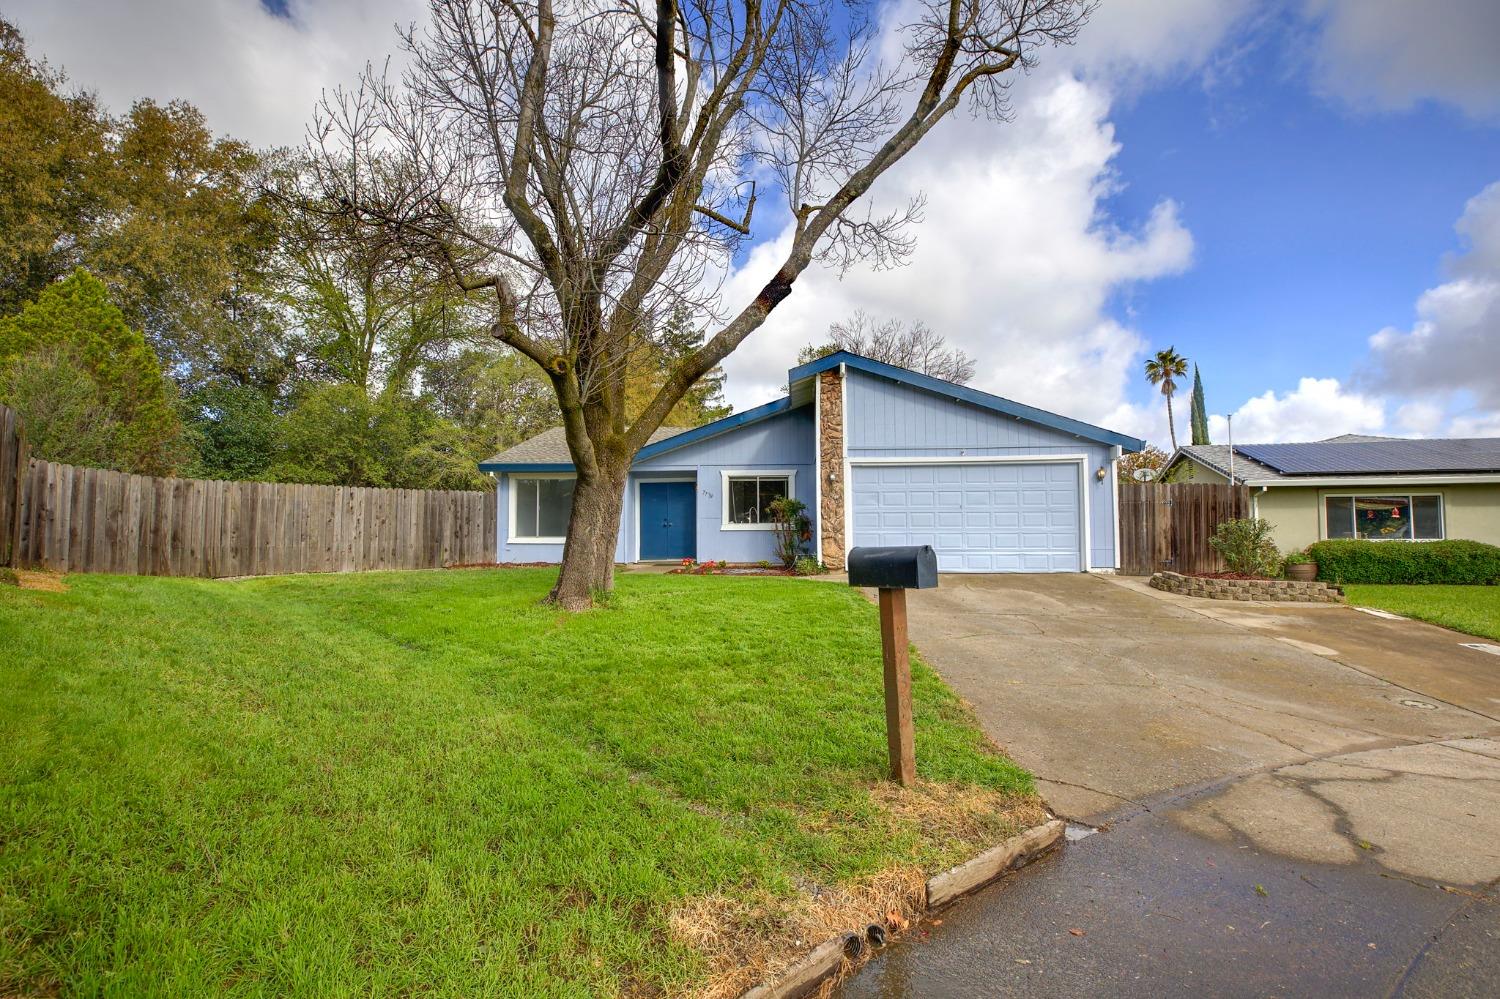 Welcome to your new home nestled in a serene cul-de-sac in Citrus Heights! This charming 3-bed, 2-ba